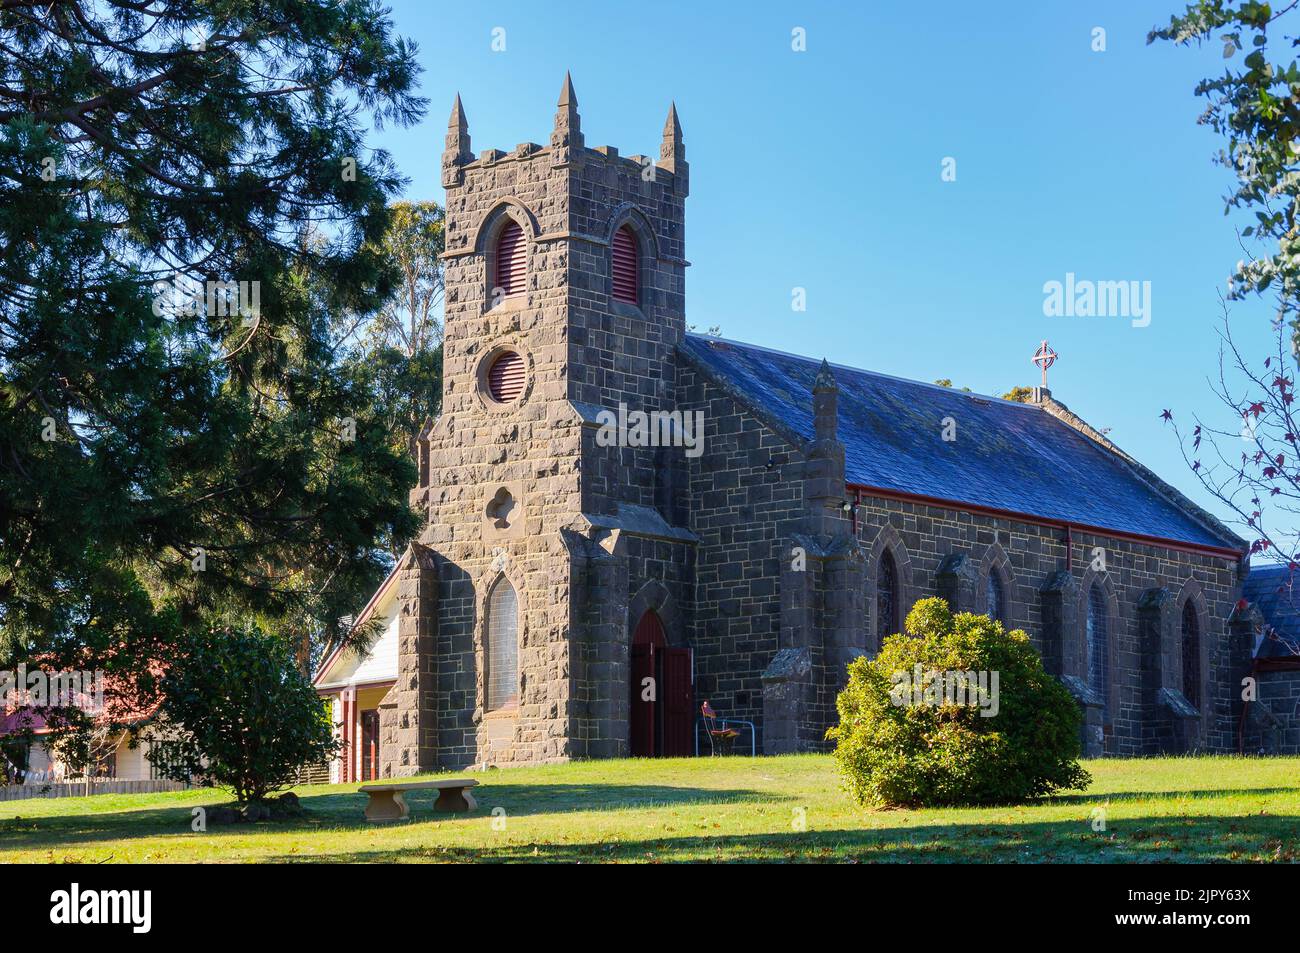 Built in 1864, St Mary’s Anglican Church is one of the original buildings in the historic township - Woodend, Victoria, Australia Stock Photo